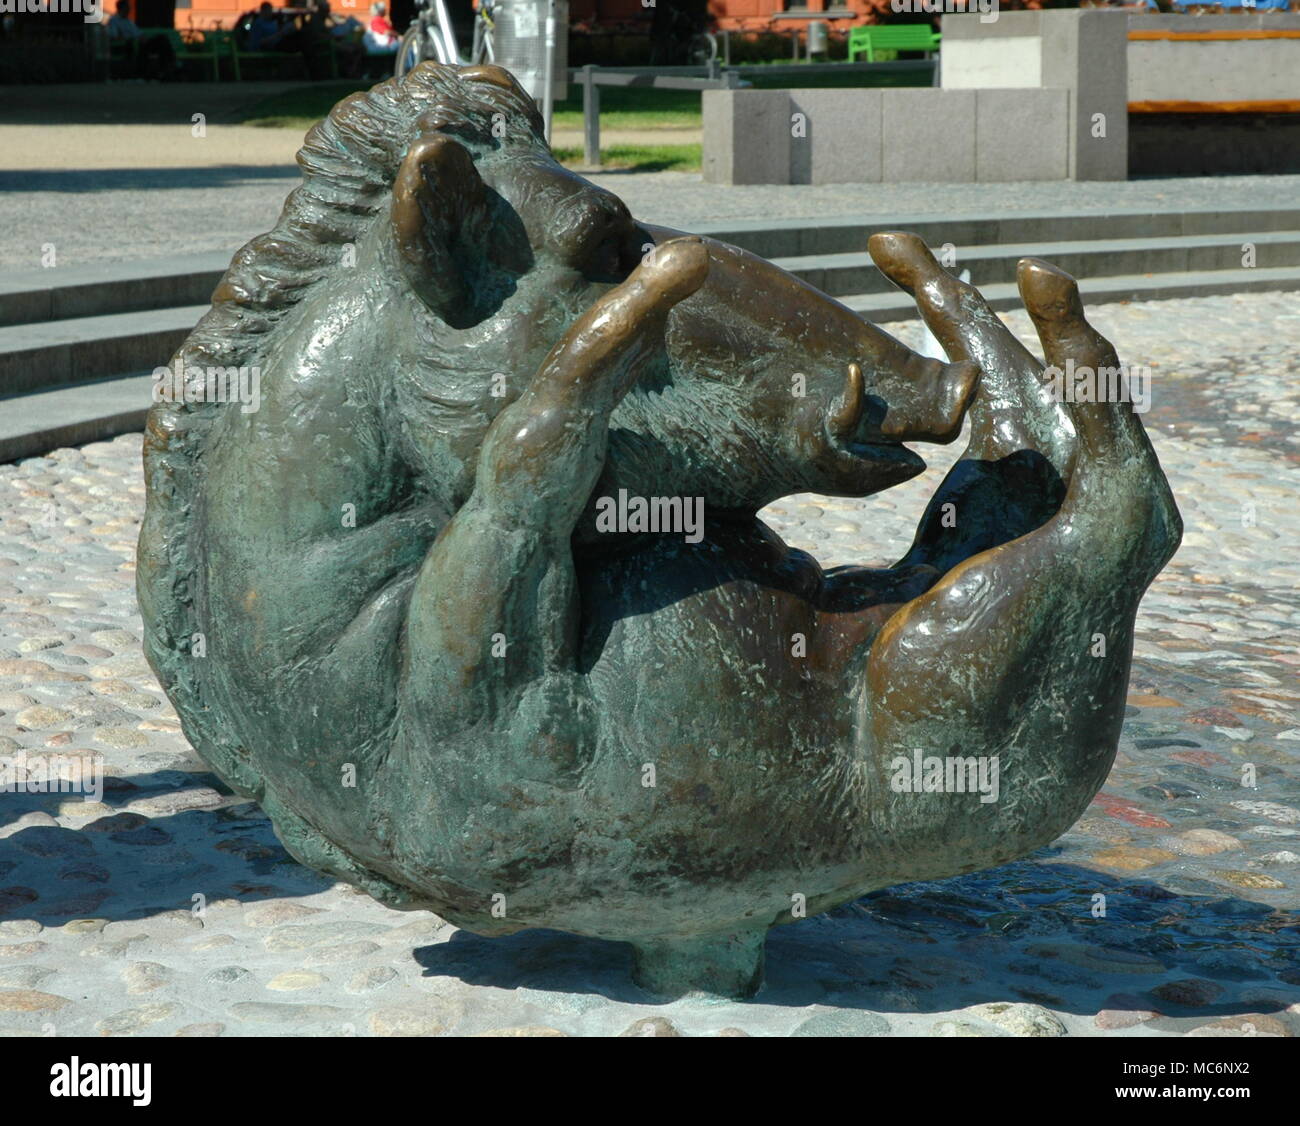 Detail from Joy of Living Fountain in University Square, Rostock, Germany Stock Photo